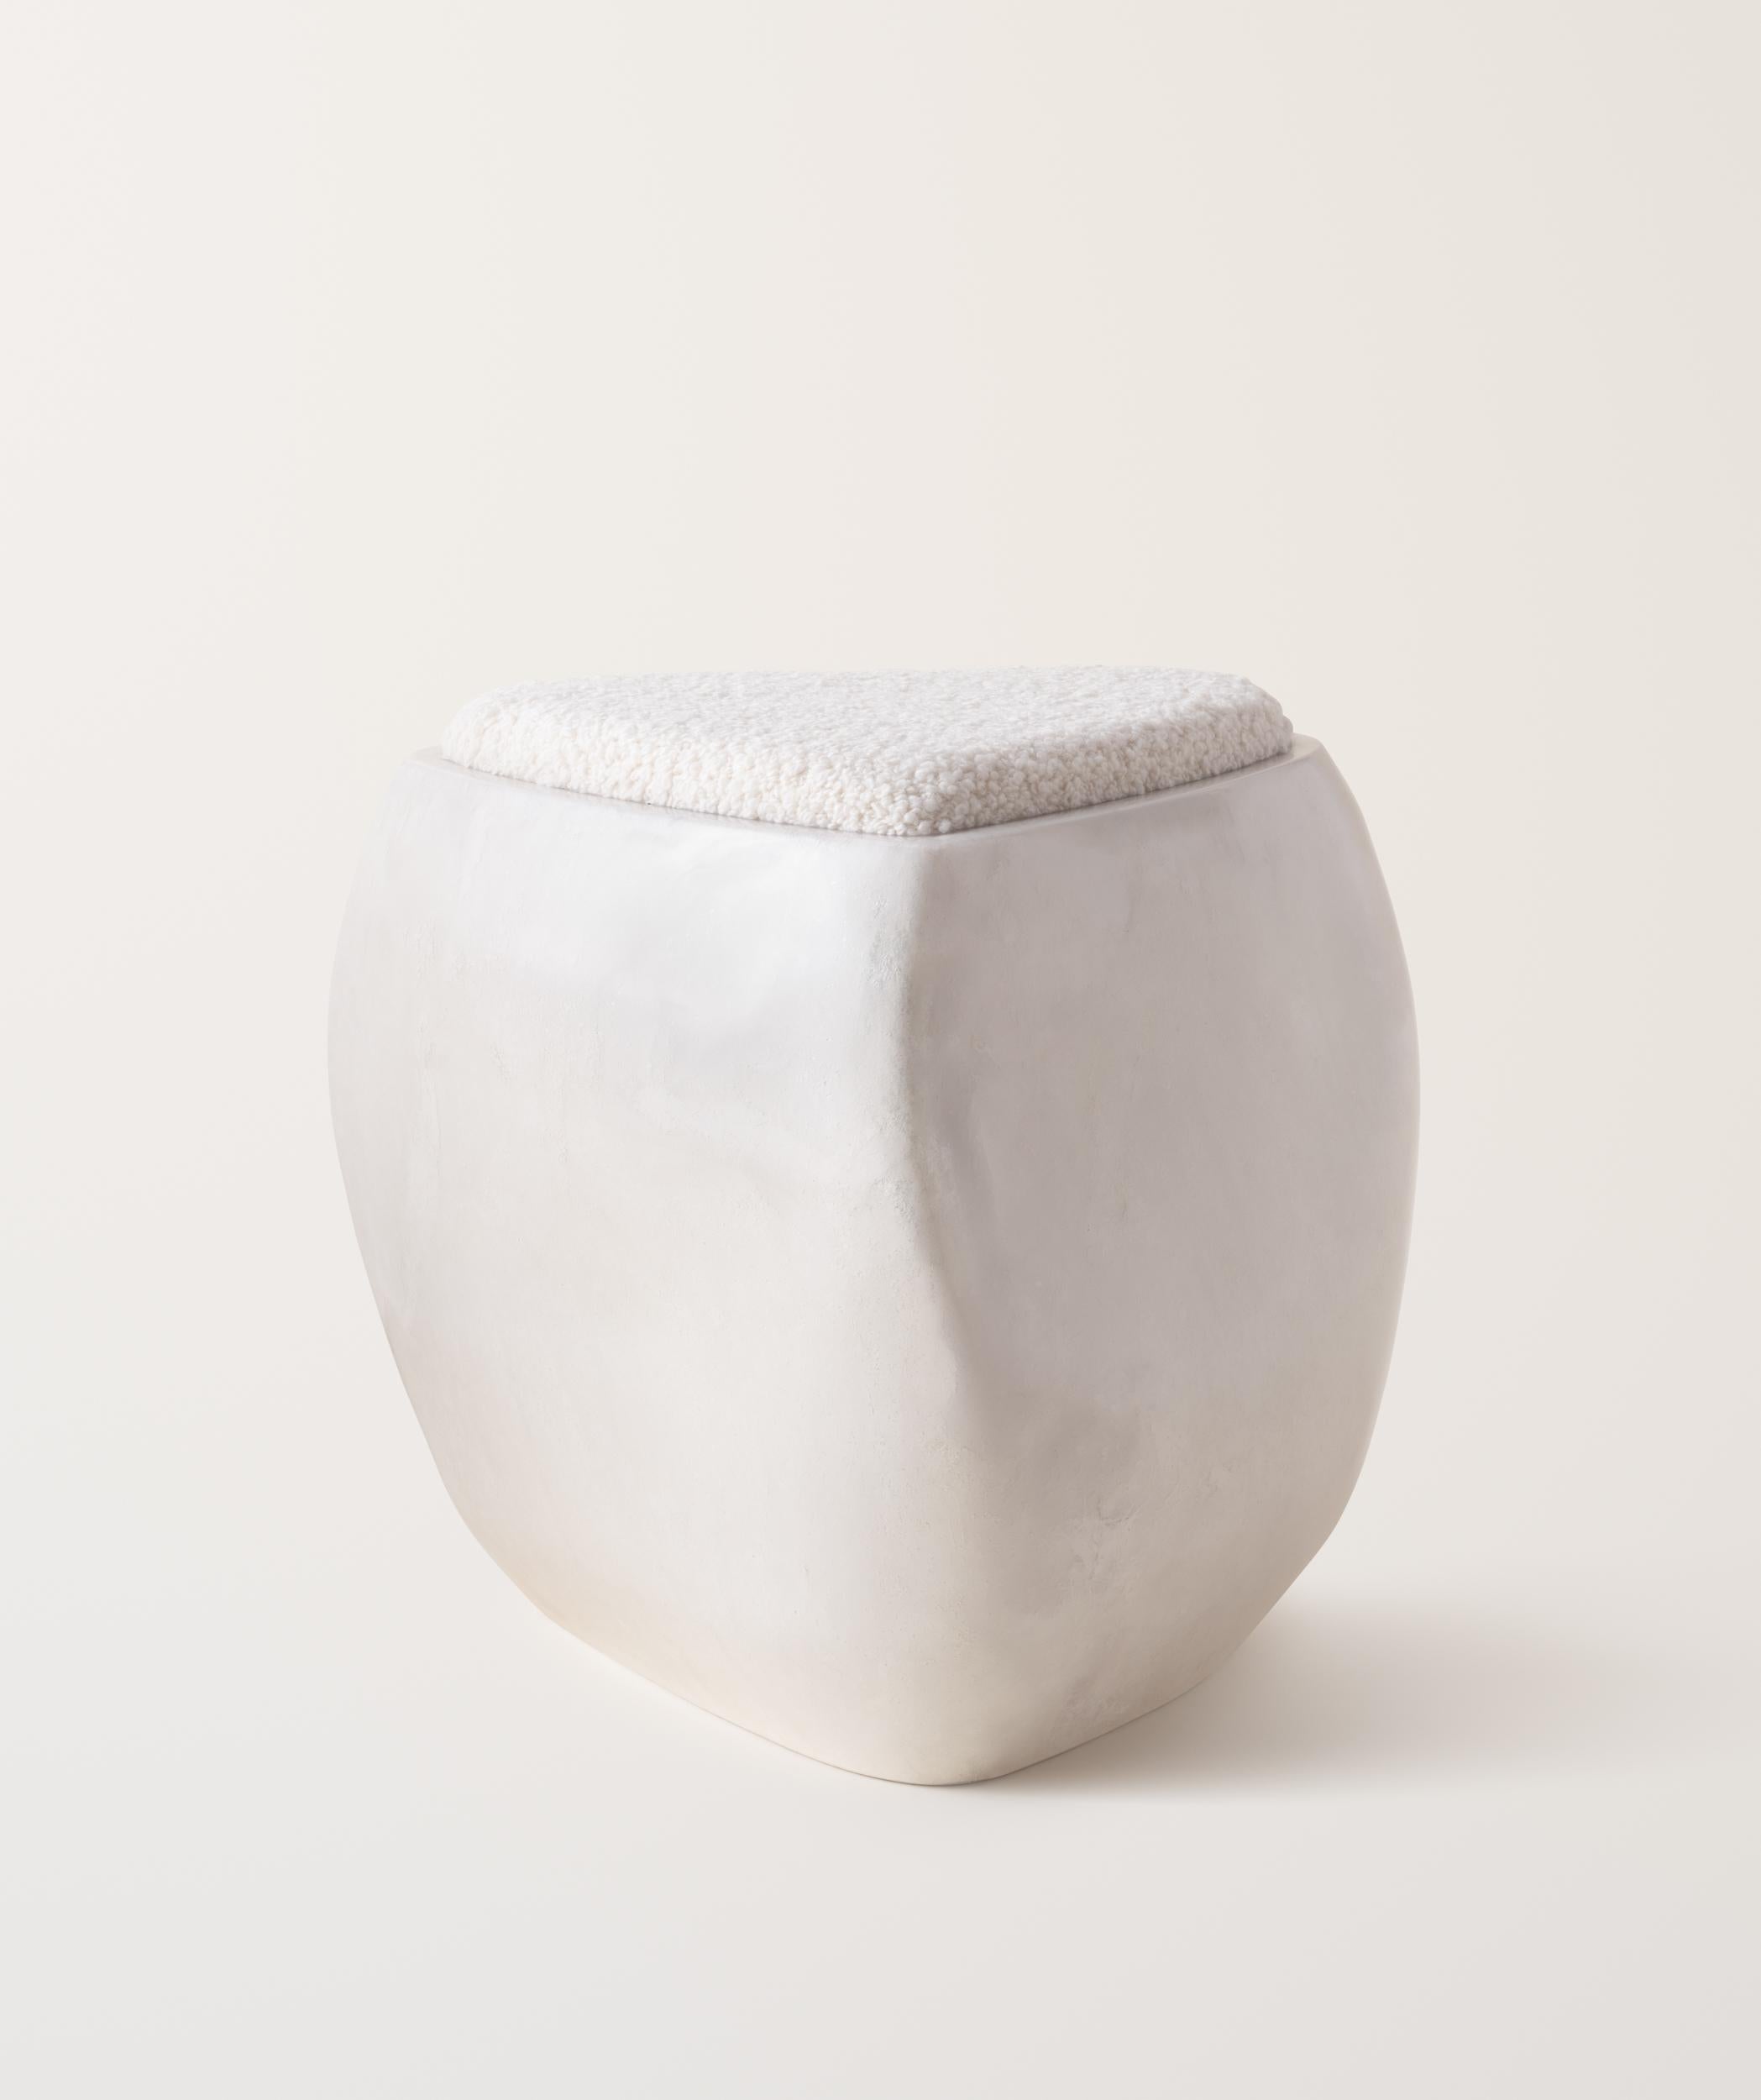 Inspired by stones shaped and polished by ever-evolving bodies of water, the River Stool presents a sculptural, asymmetrical form made up of soft curves and lines. The stool is expertly made by hand-layering fiberglass and gel coat over several